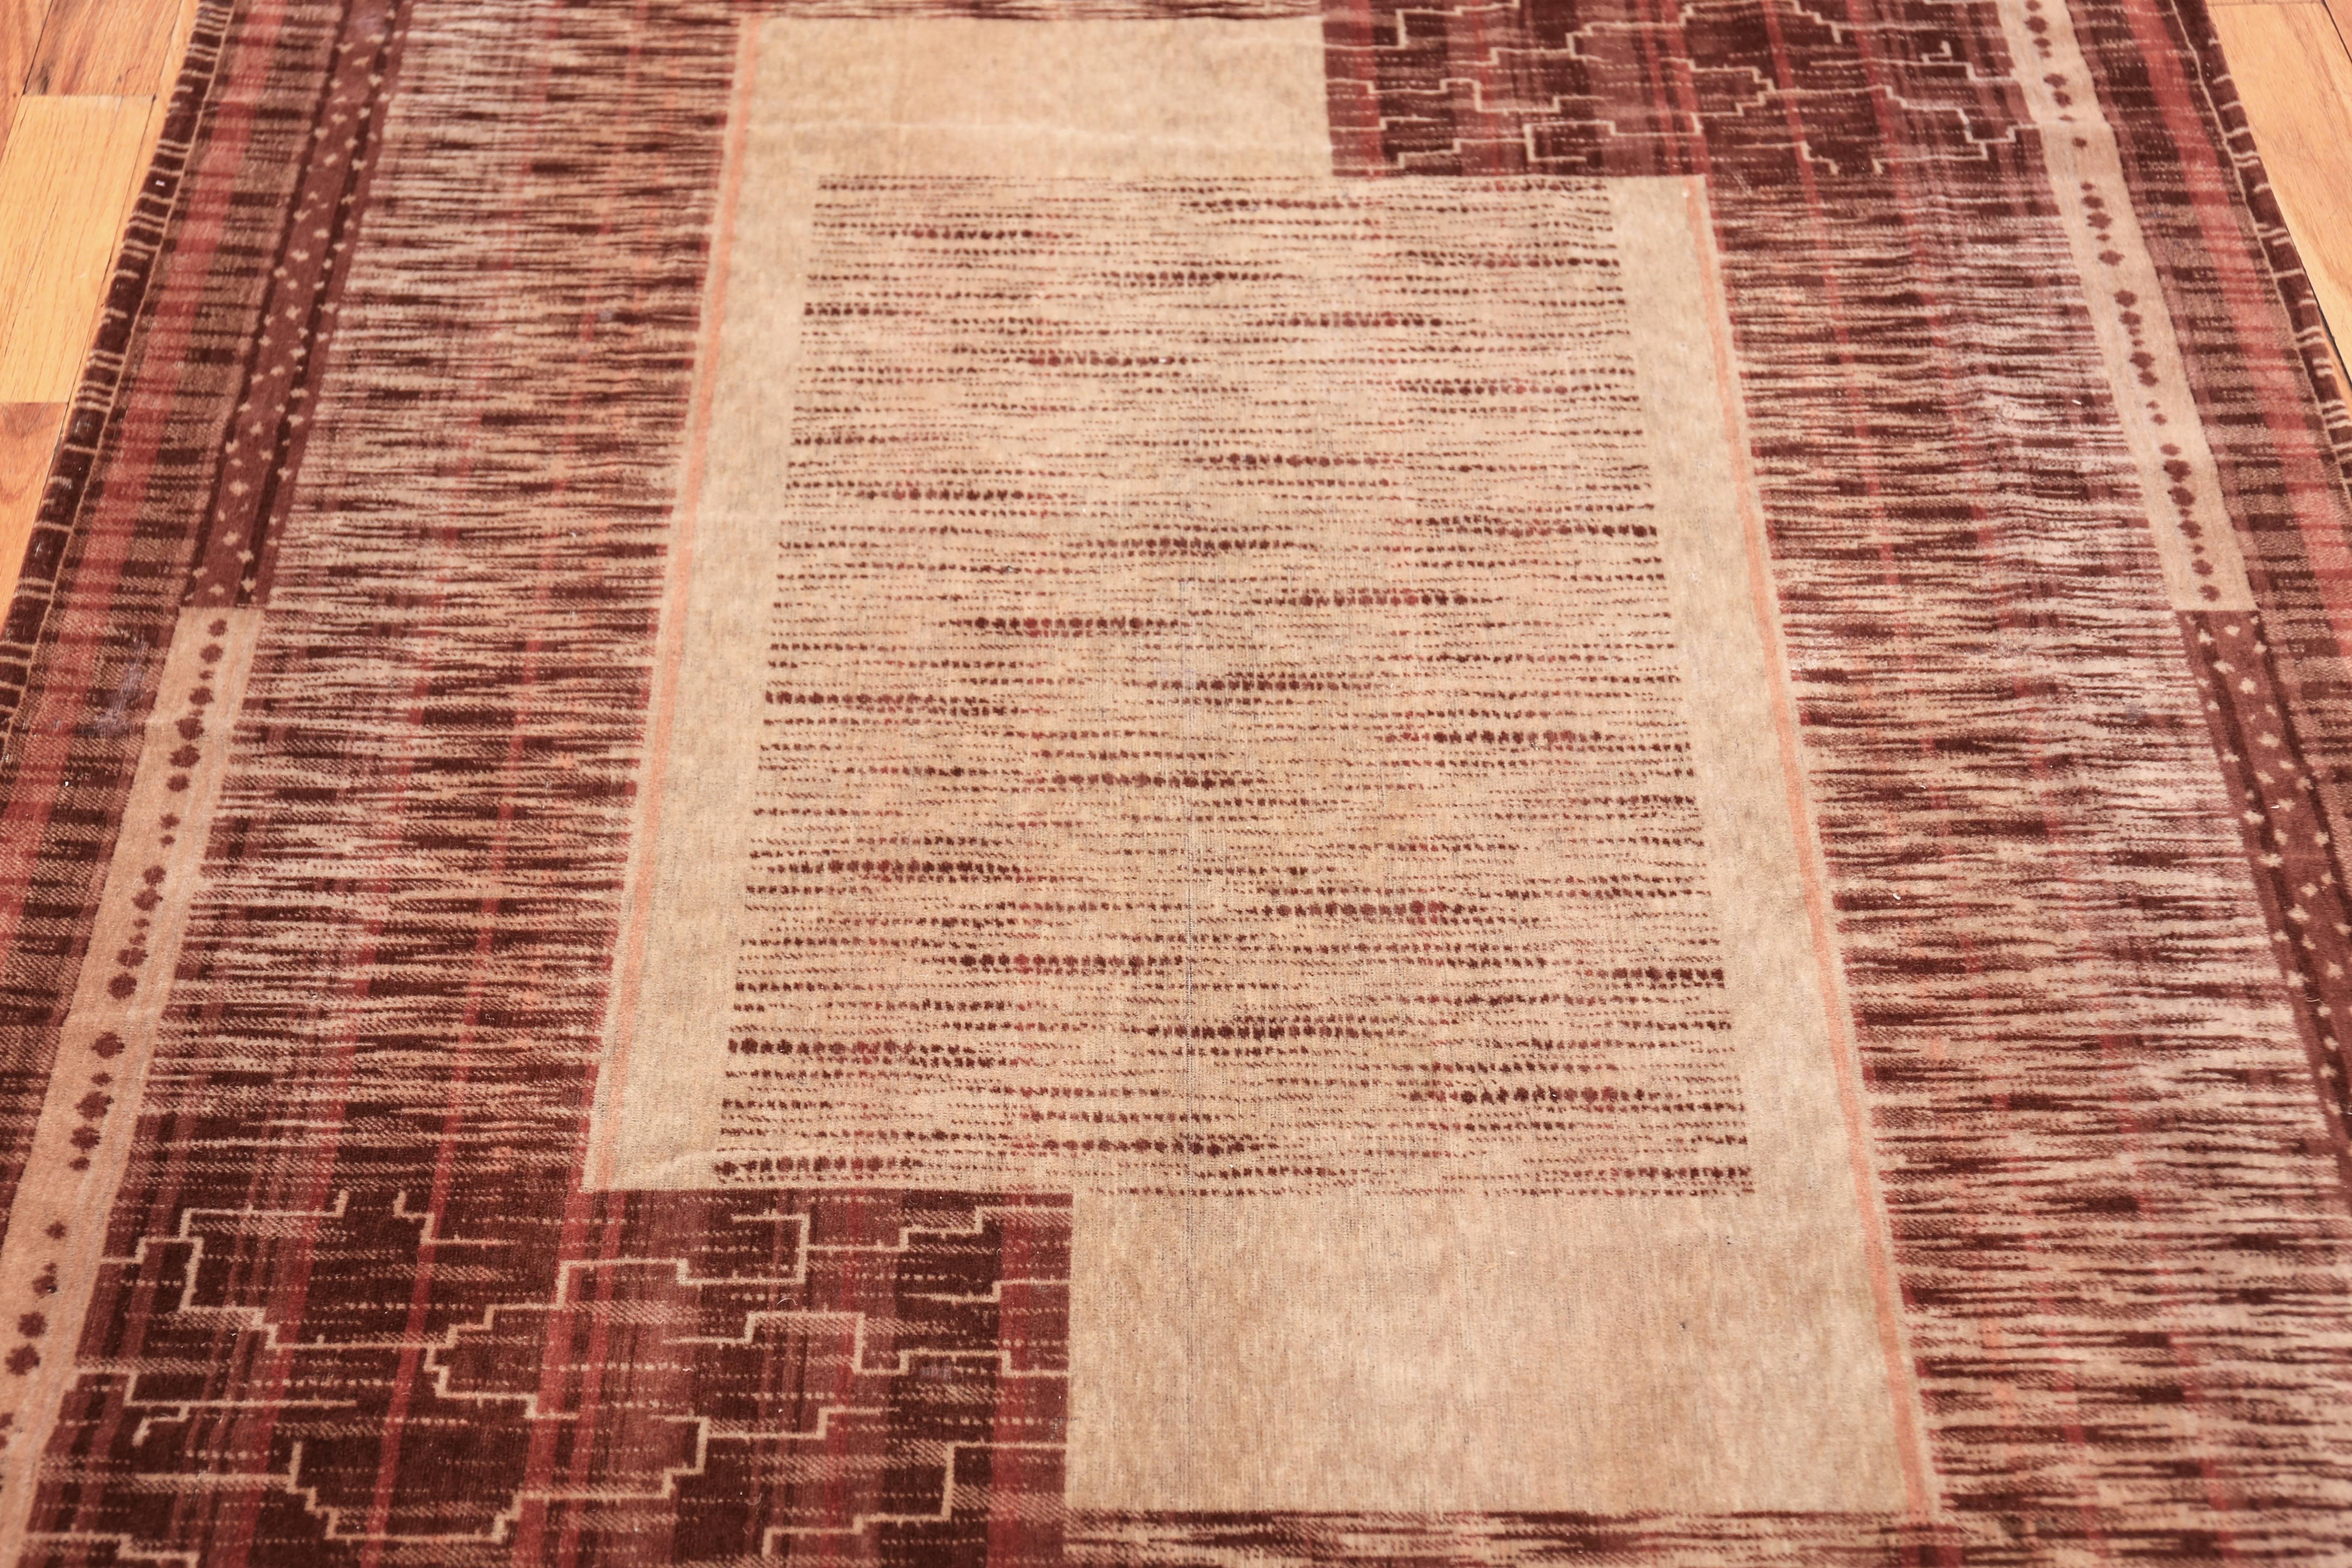 Hand-Woven Vintage French Art Deco Rug. Size: 4 ft x 9 ft (1.22 m x 2.74 m)